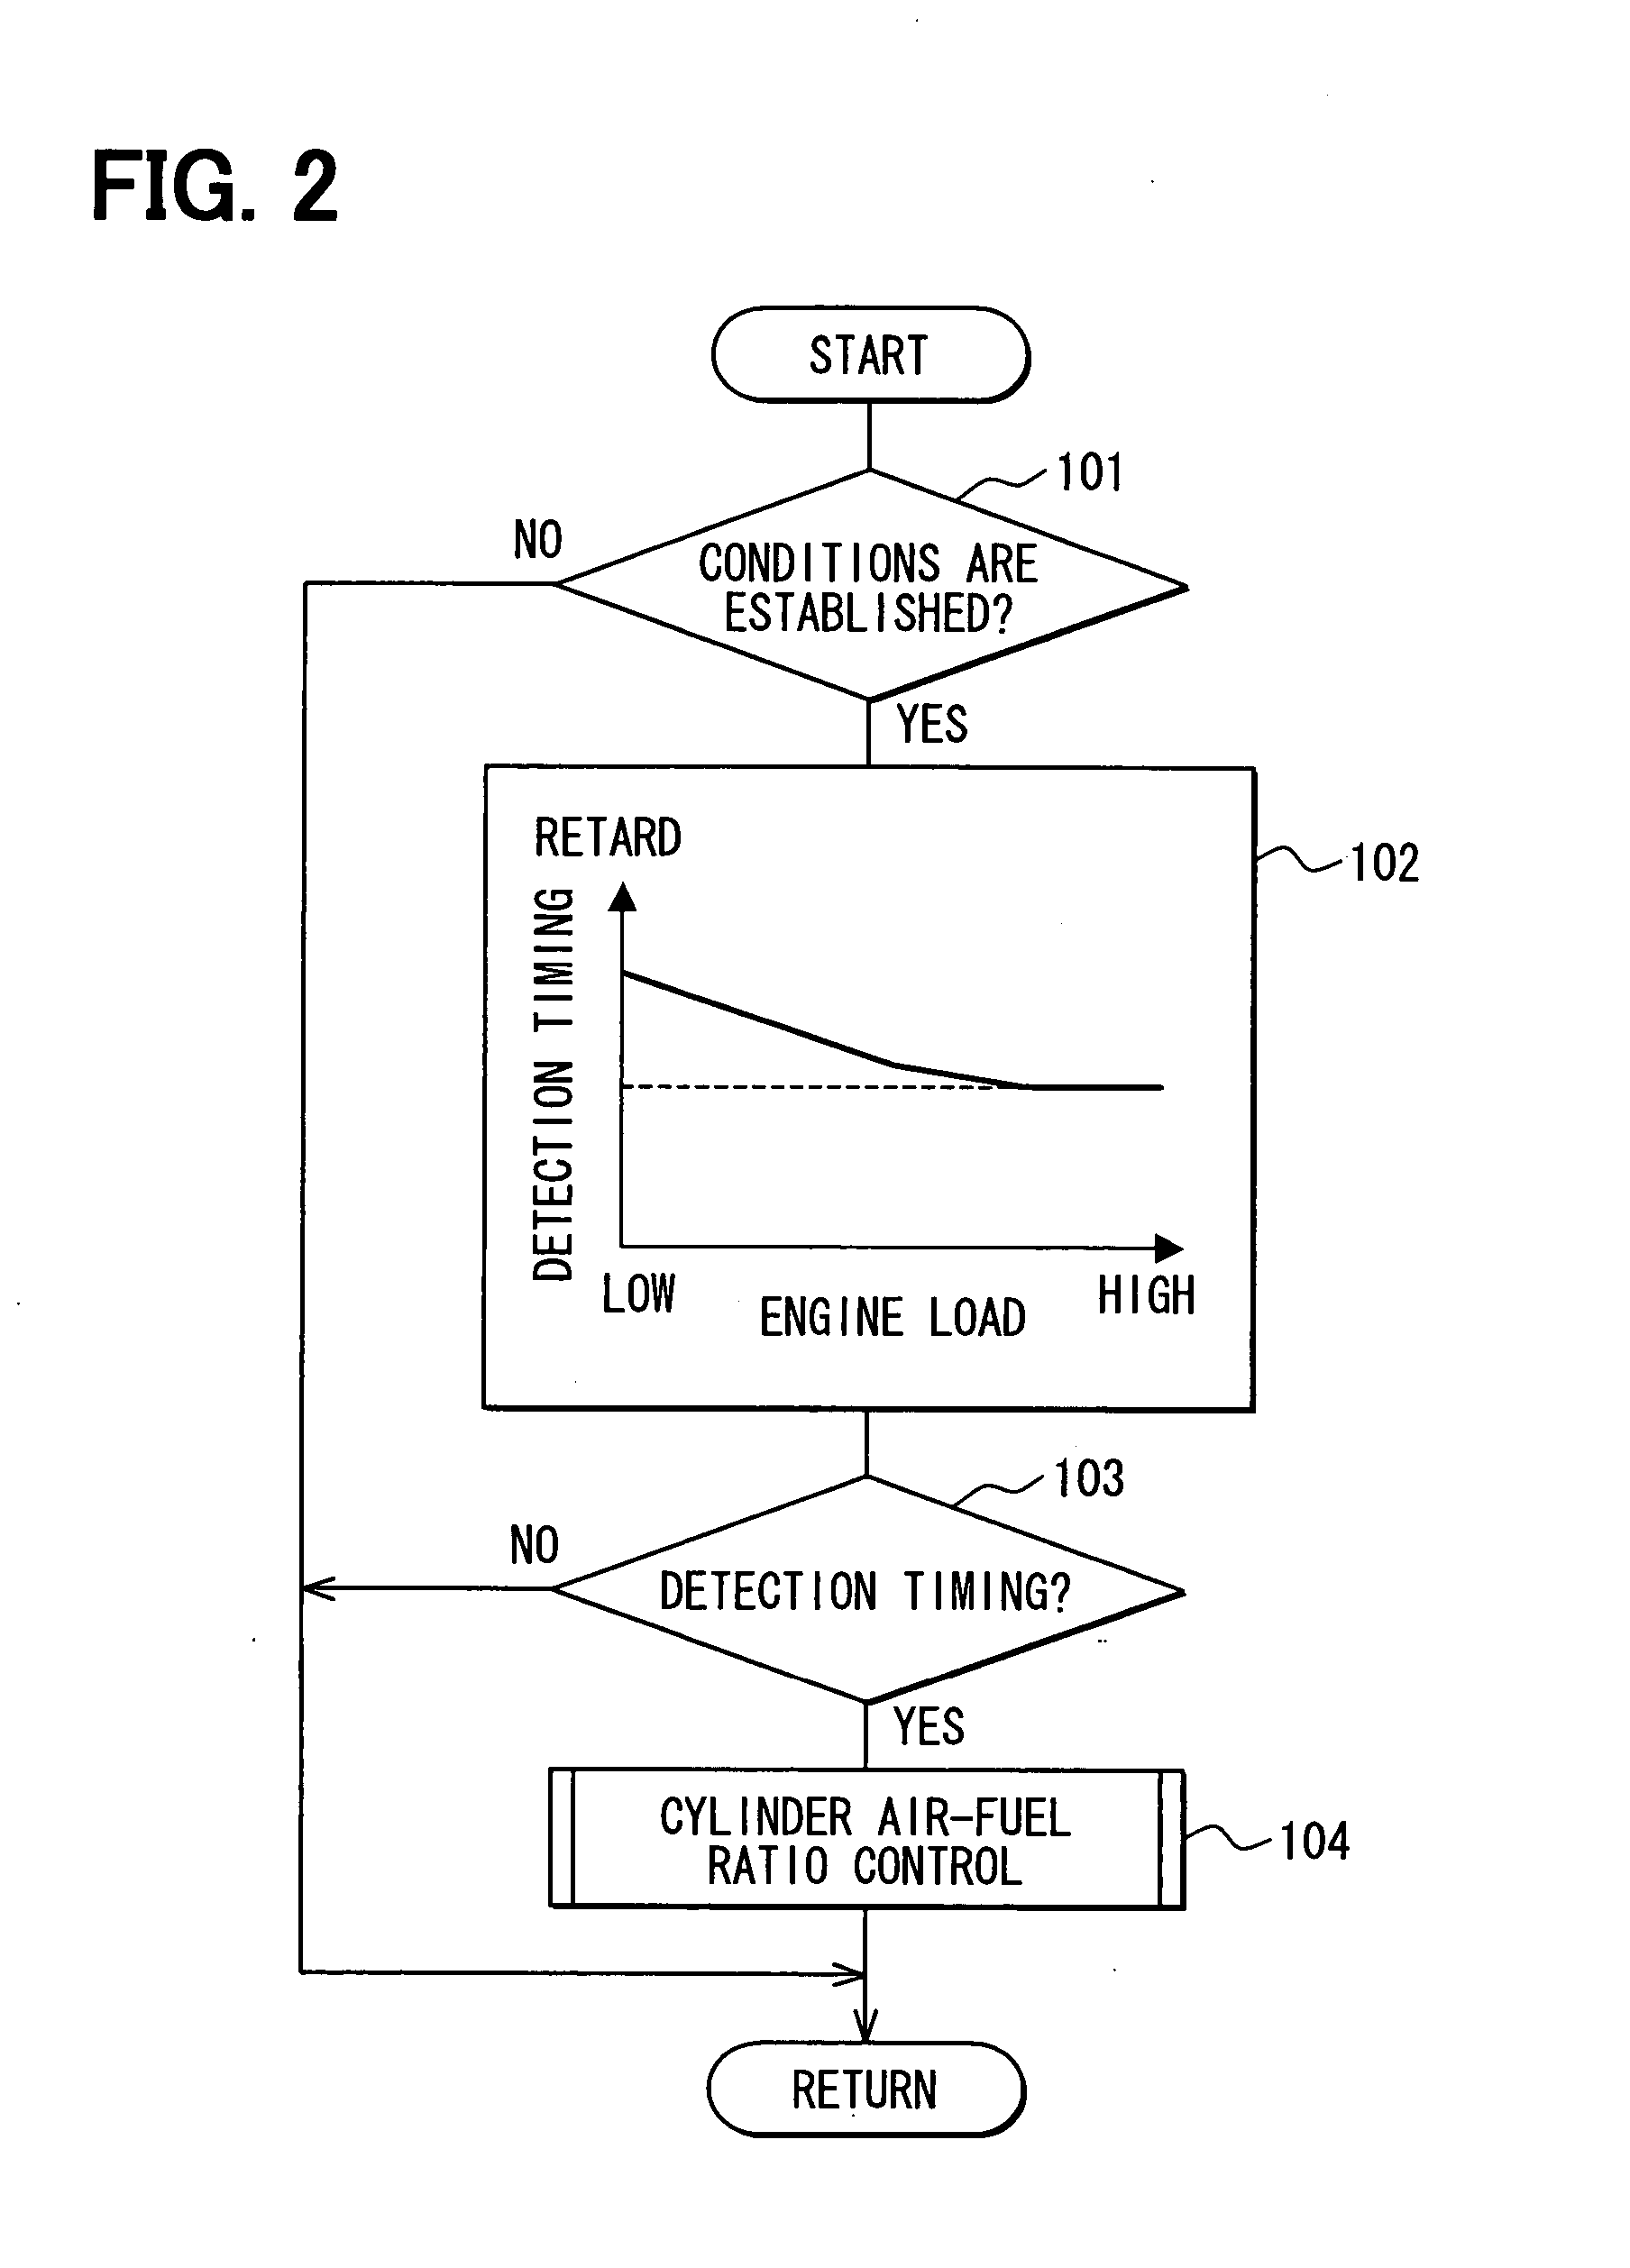 Cylinder air-fuel ratio controller for internal combustion engine